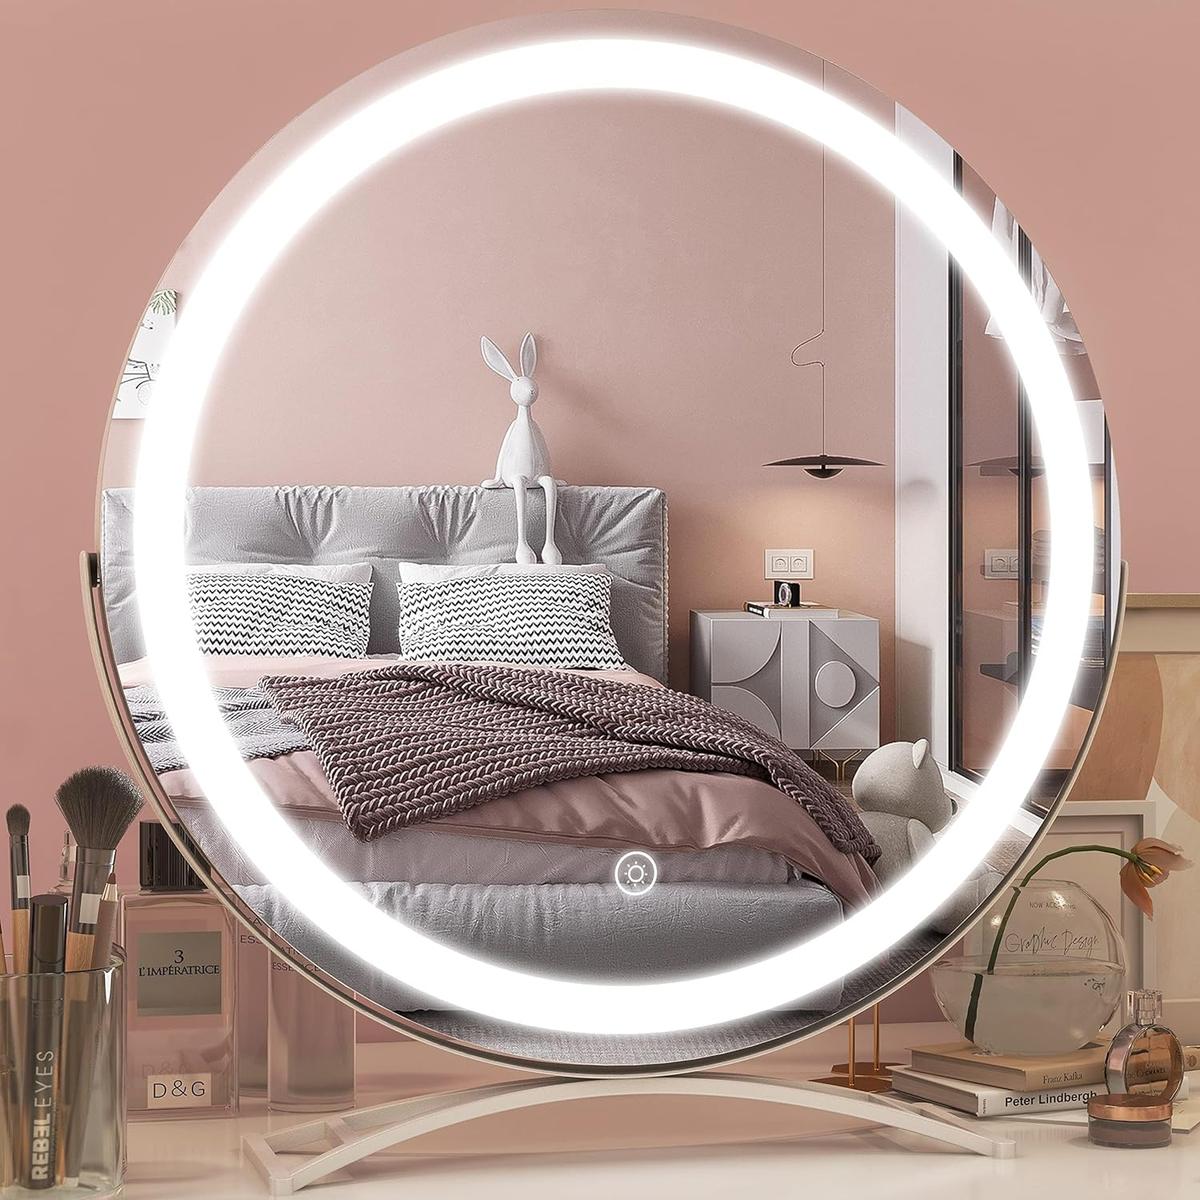 ROLOVE 18" Makeup Vanity Mirror w/Lights, Smart Touch Control, (White), Retail $60.00